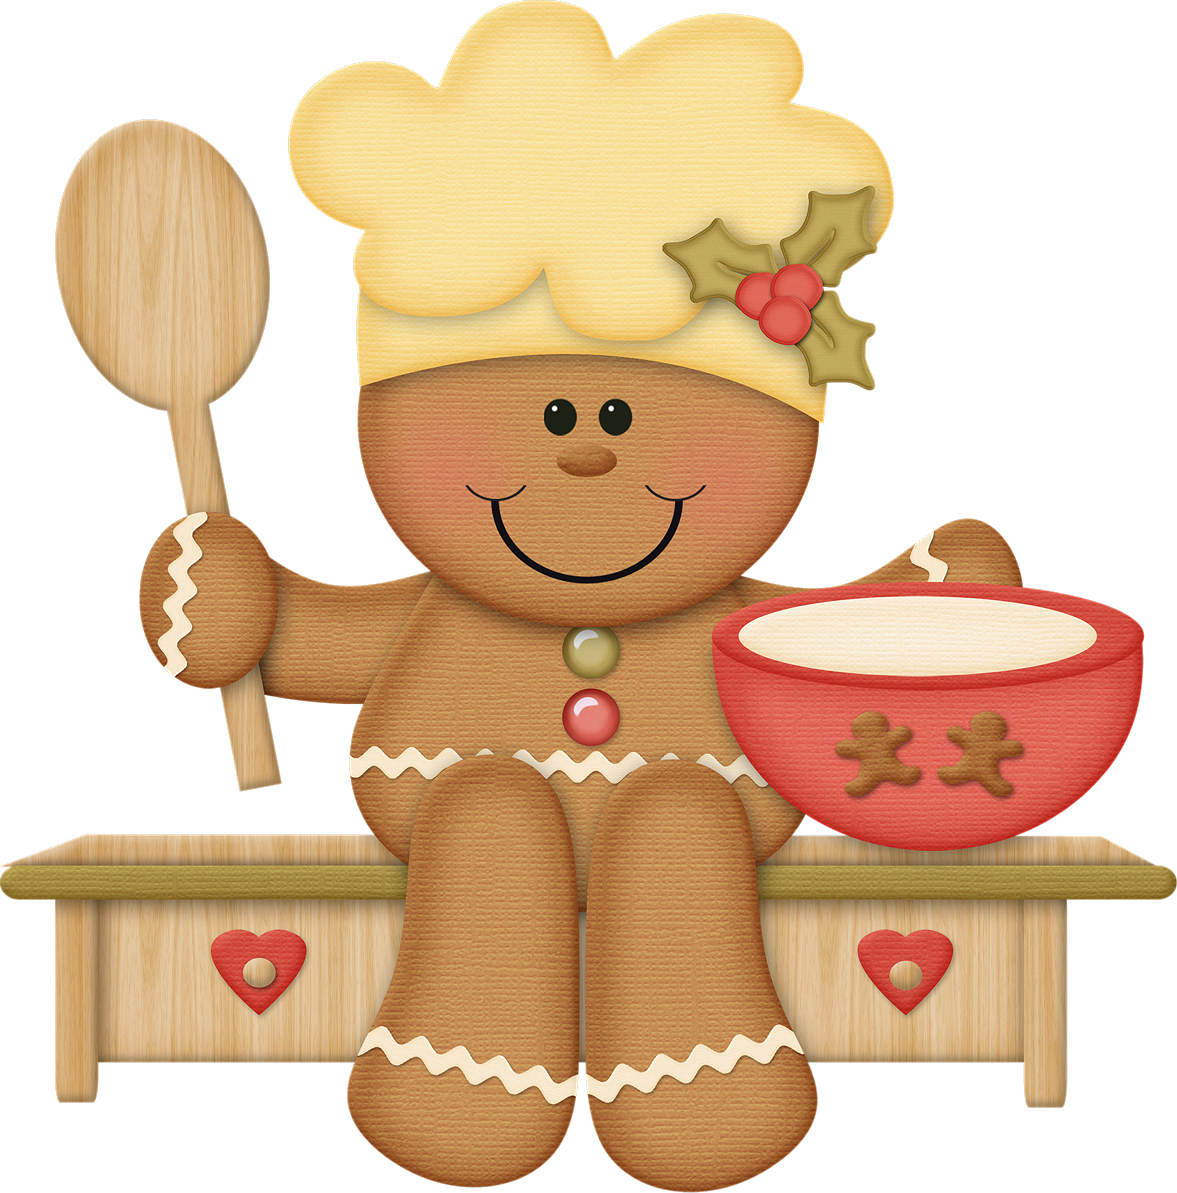 Free Christmas Baking Cliparts, Download Free Clip Art, Free.